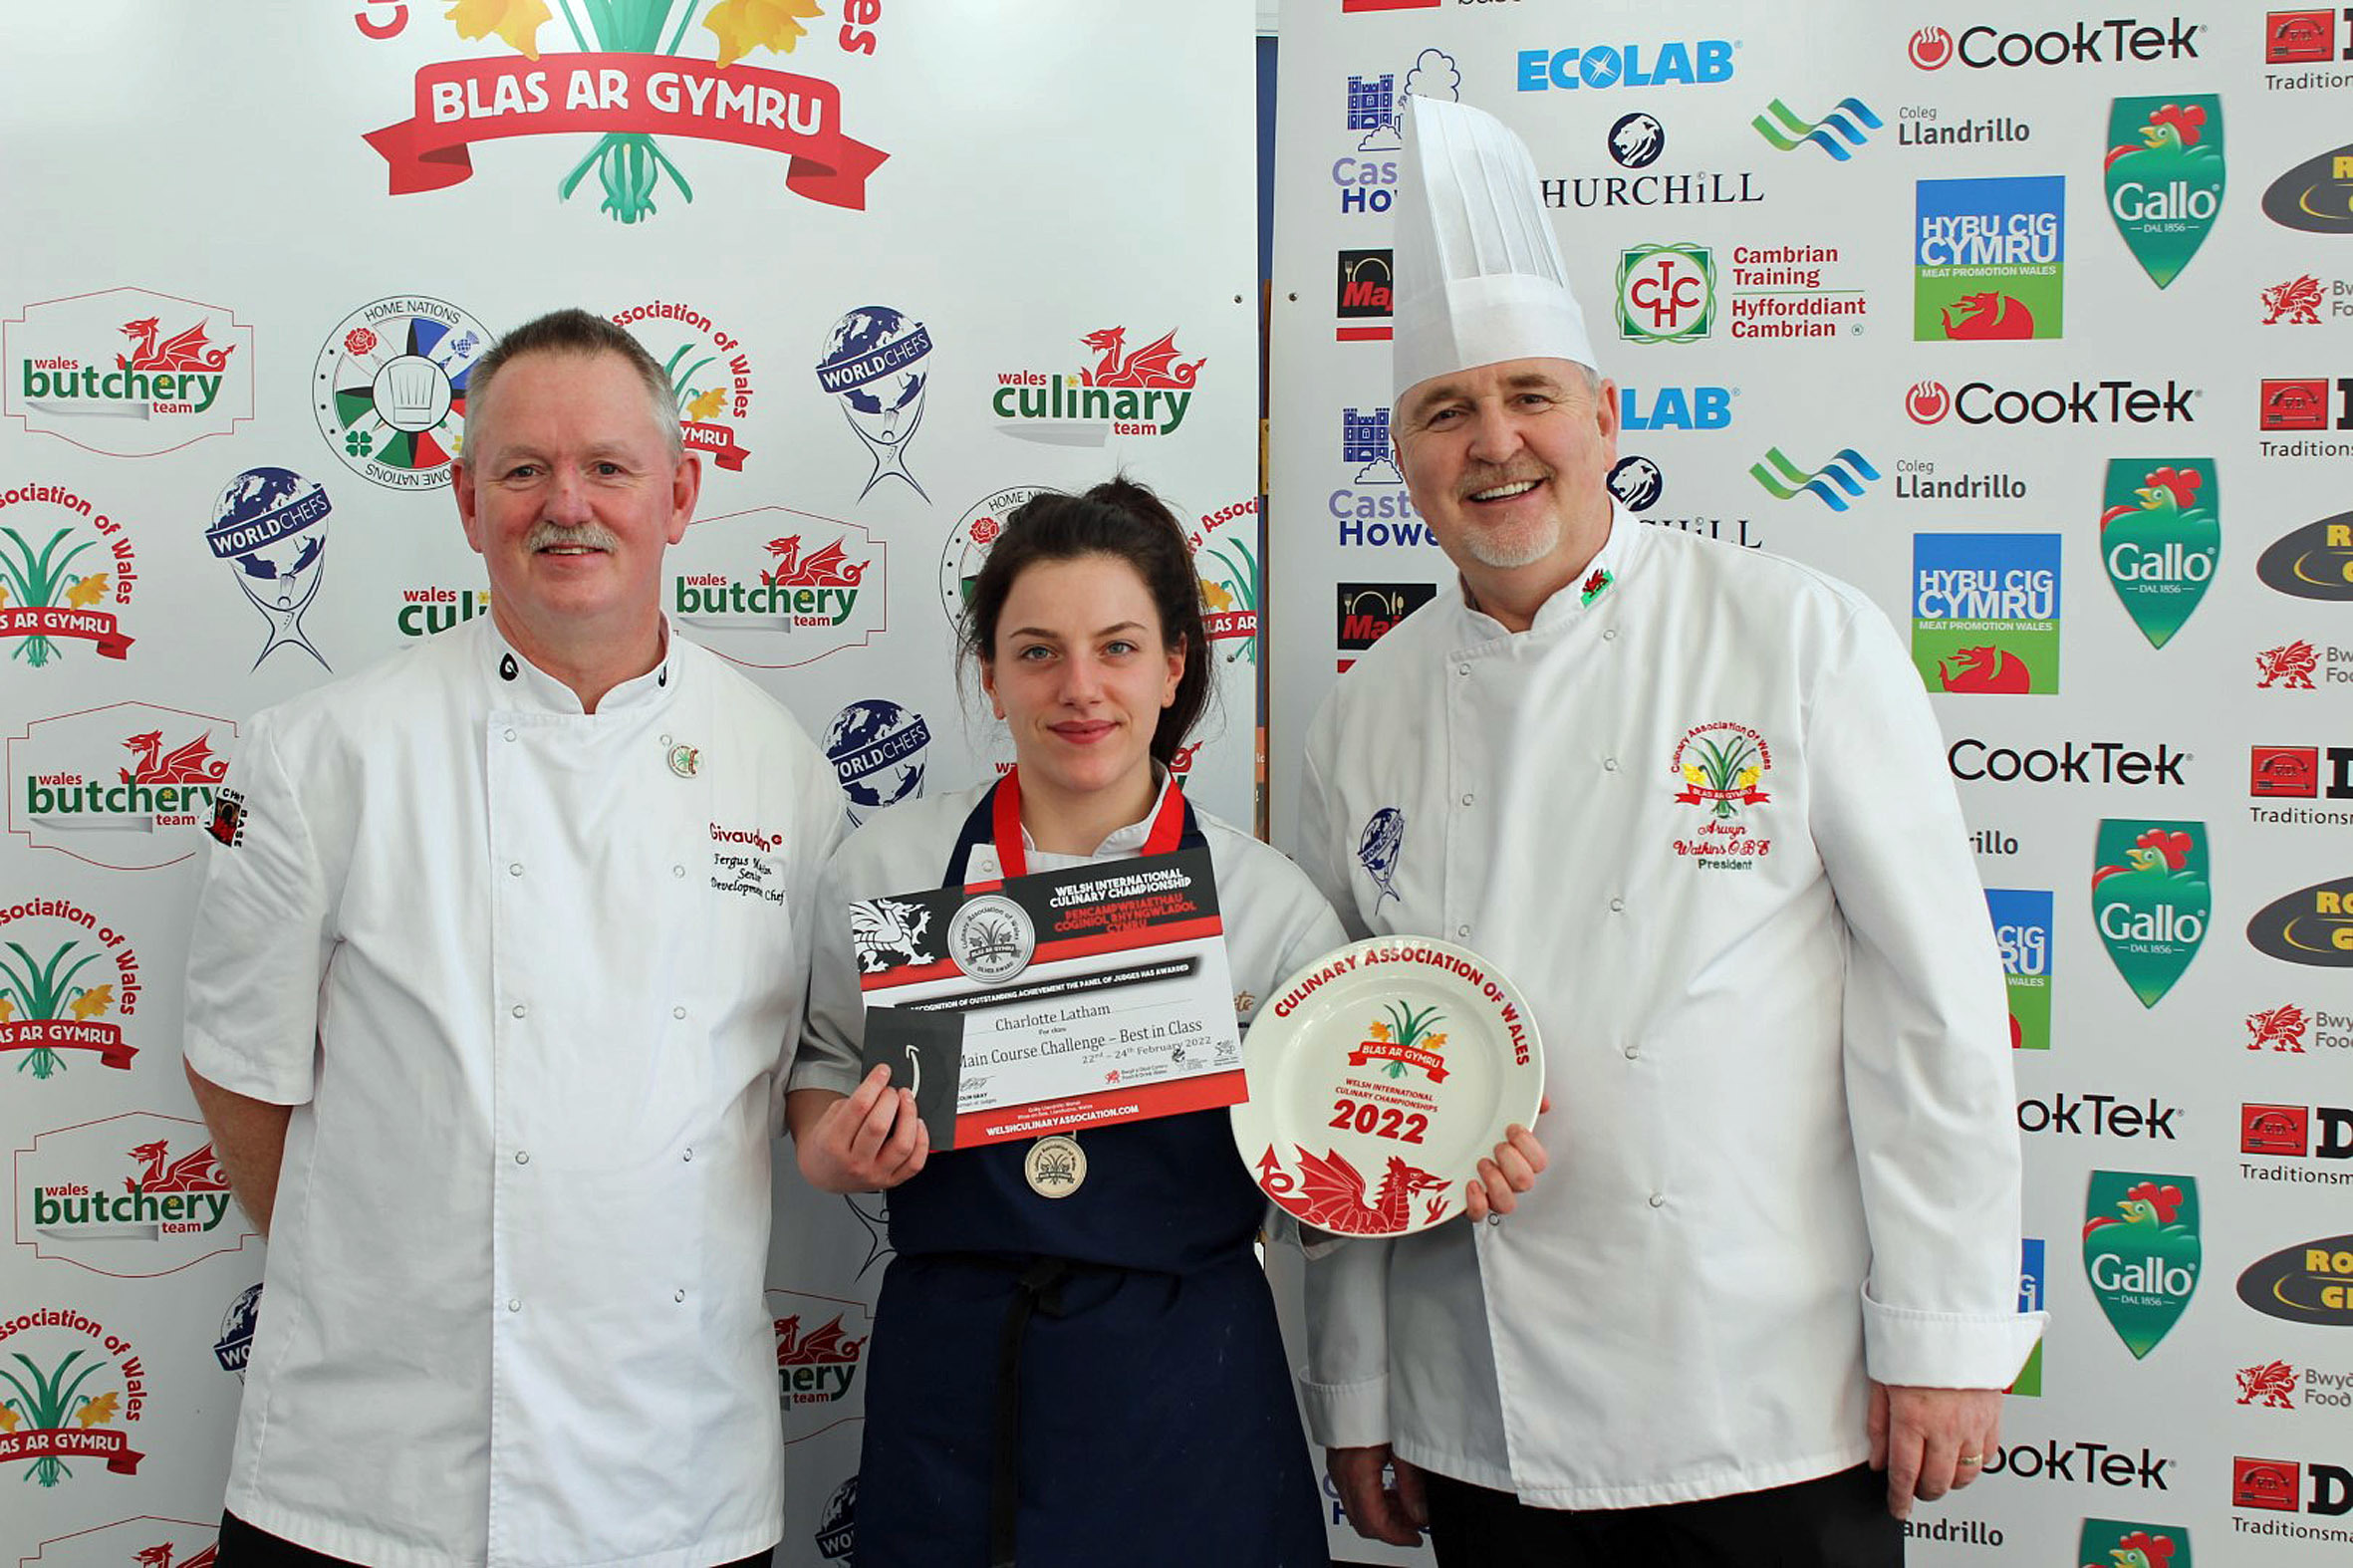 Charlotte Latham receives her Major International certificate from Fergus Martin (left) and Culinary Association of Wales president Arwyn Watkins.